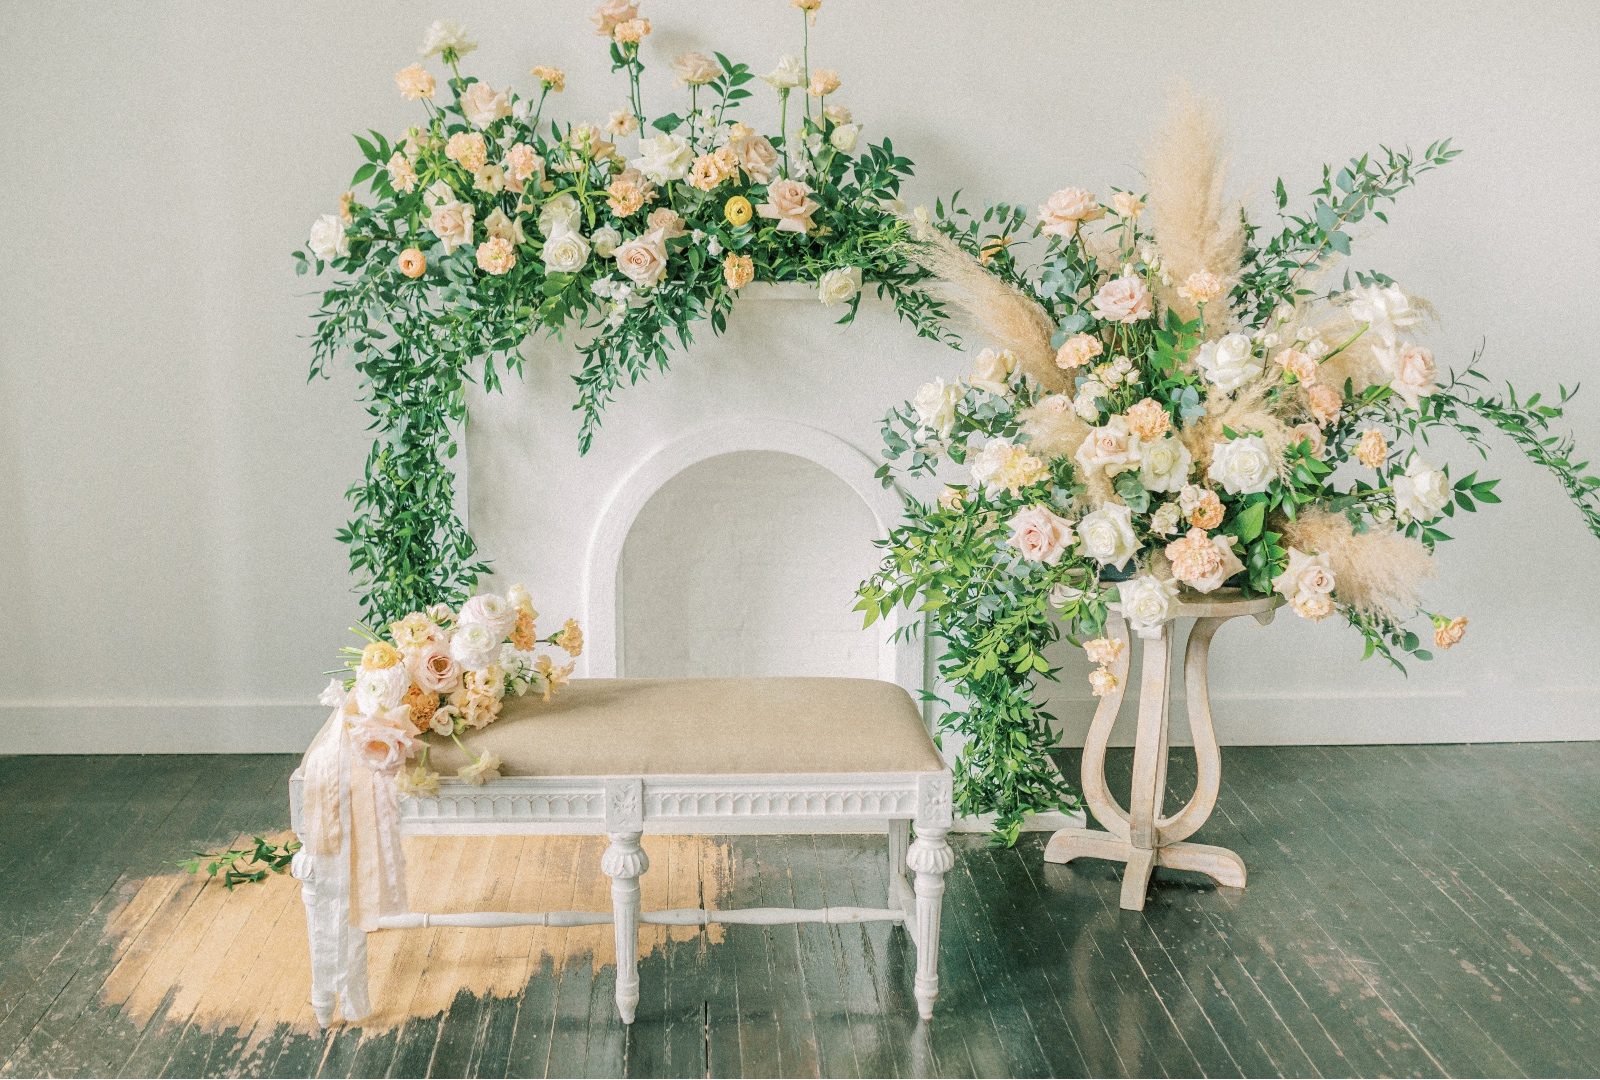 All of the floral pieces for the photoshoot - the bridal bouquet set on a bench in front of a faux fireplace with a large floral arrangement along the mantel and beside it a big floral arrangmeent in coordinating colours on top of a decorative stand.